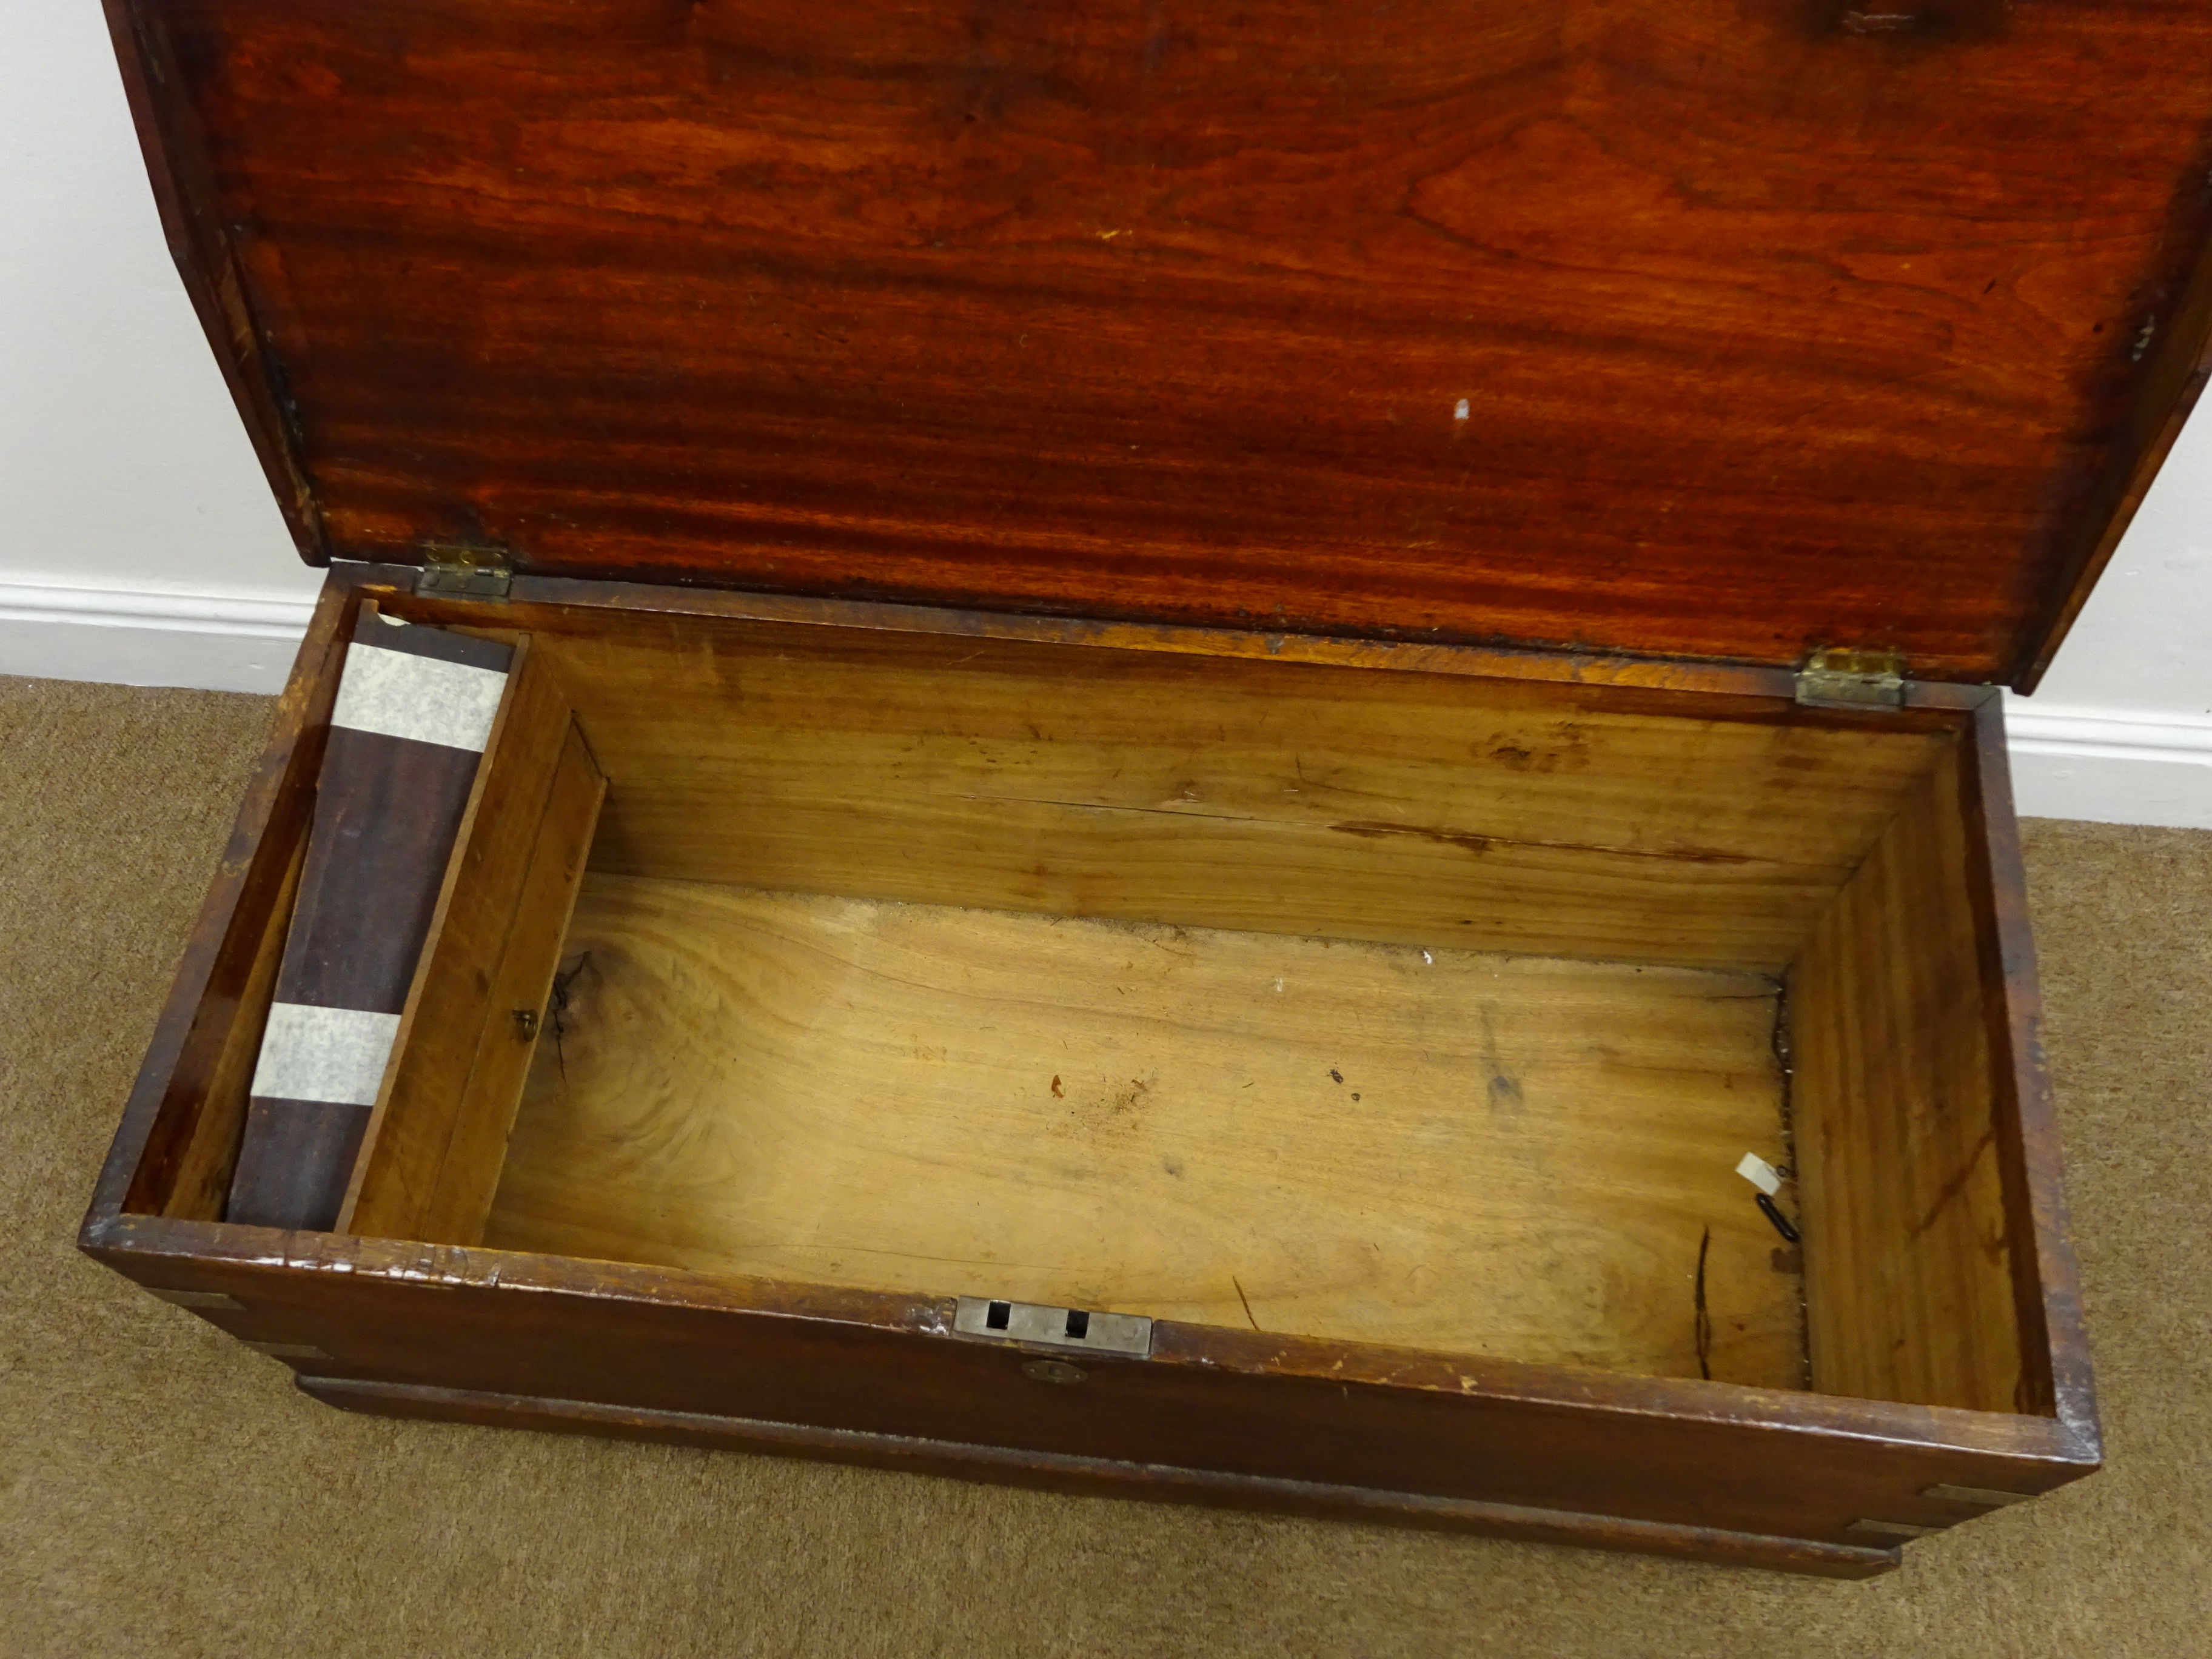 Camphor wood Seaman's chest,hinged lid with candle box and drawer, - Image 4 of 4